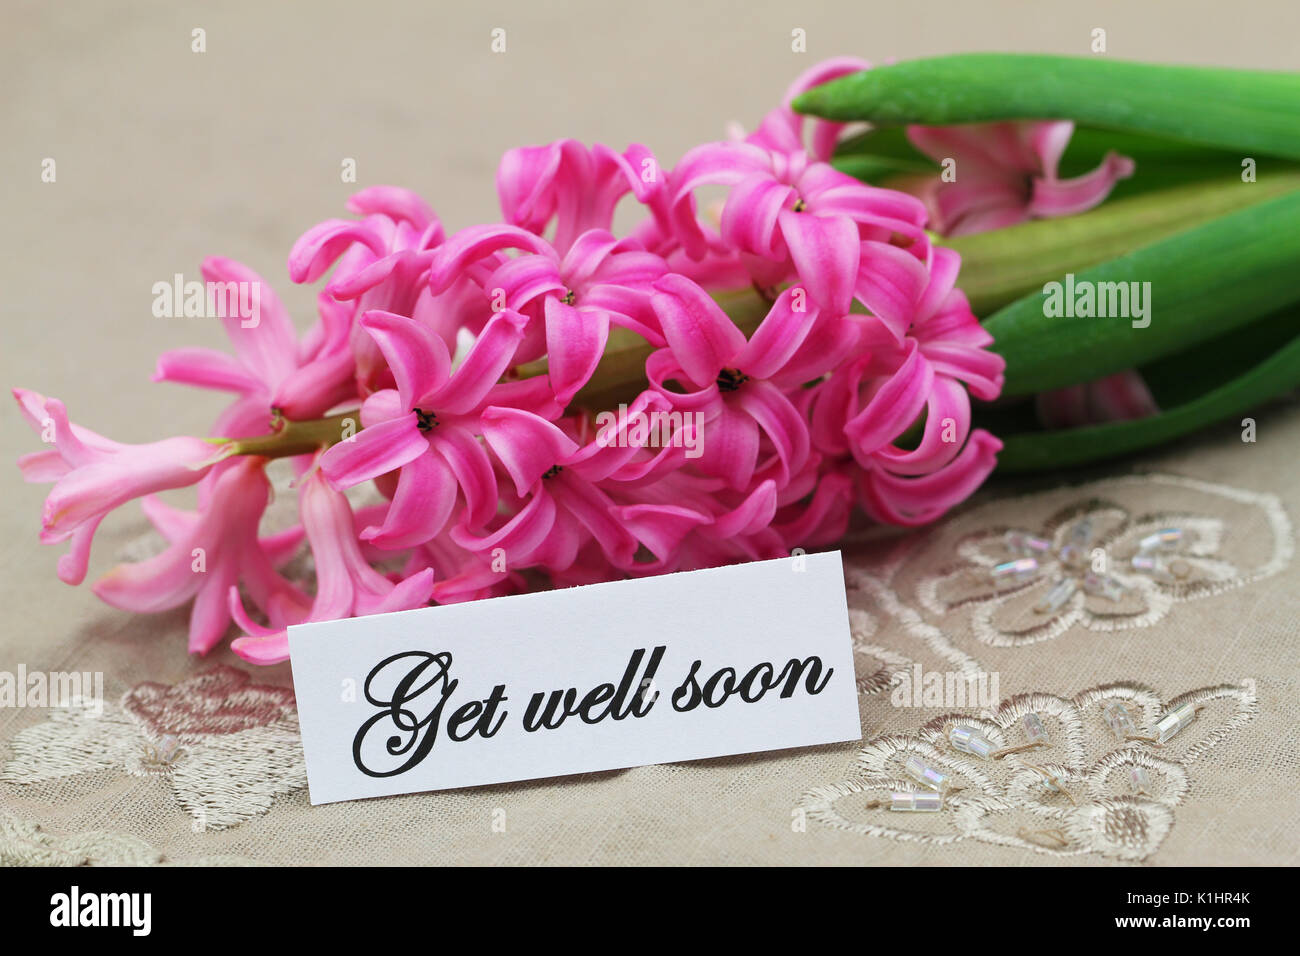 Get well soon with pink hyacinth flower Stock Photo